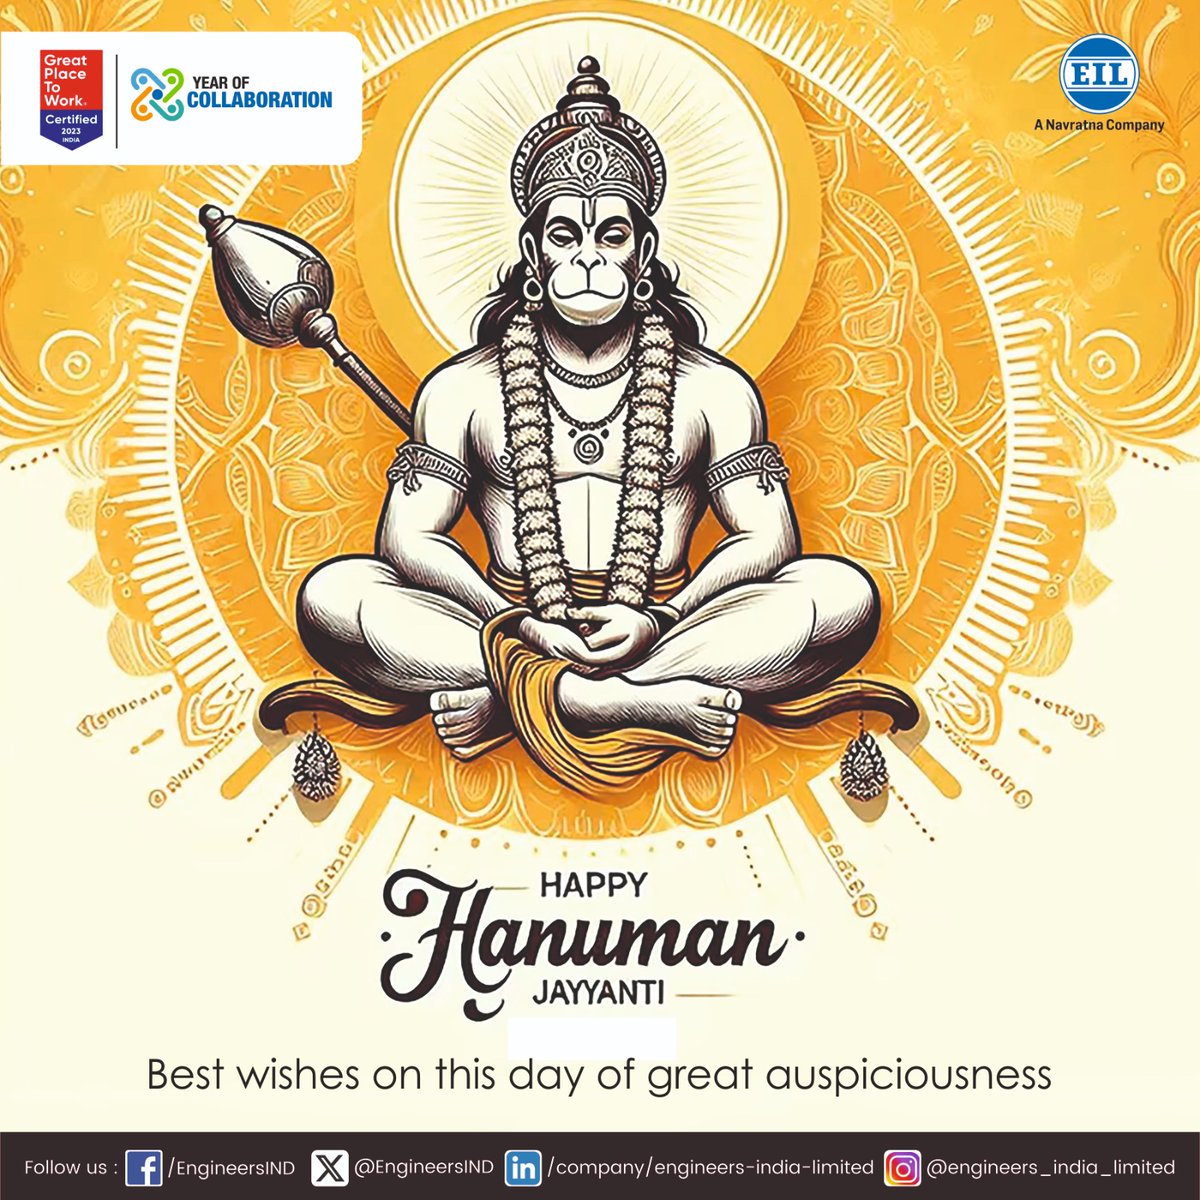 Team EIL wishes all its valuable stakeholders and collaborators a happy Shri Hanuman Jayanti. On this auspicious day, we reflect on the remarkable qualities of Lord Hanuman of Courage, Strength, Persistence, Constancy of Aim and Effort that have inspired us in our pursuit of